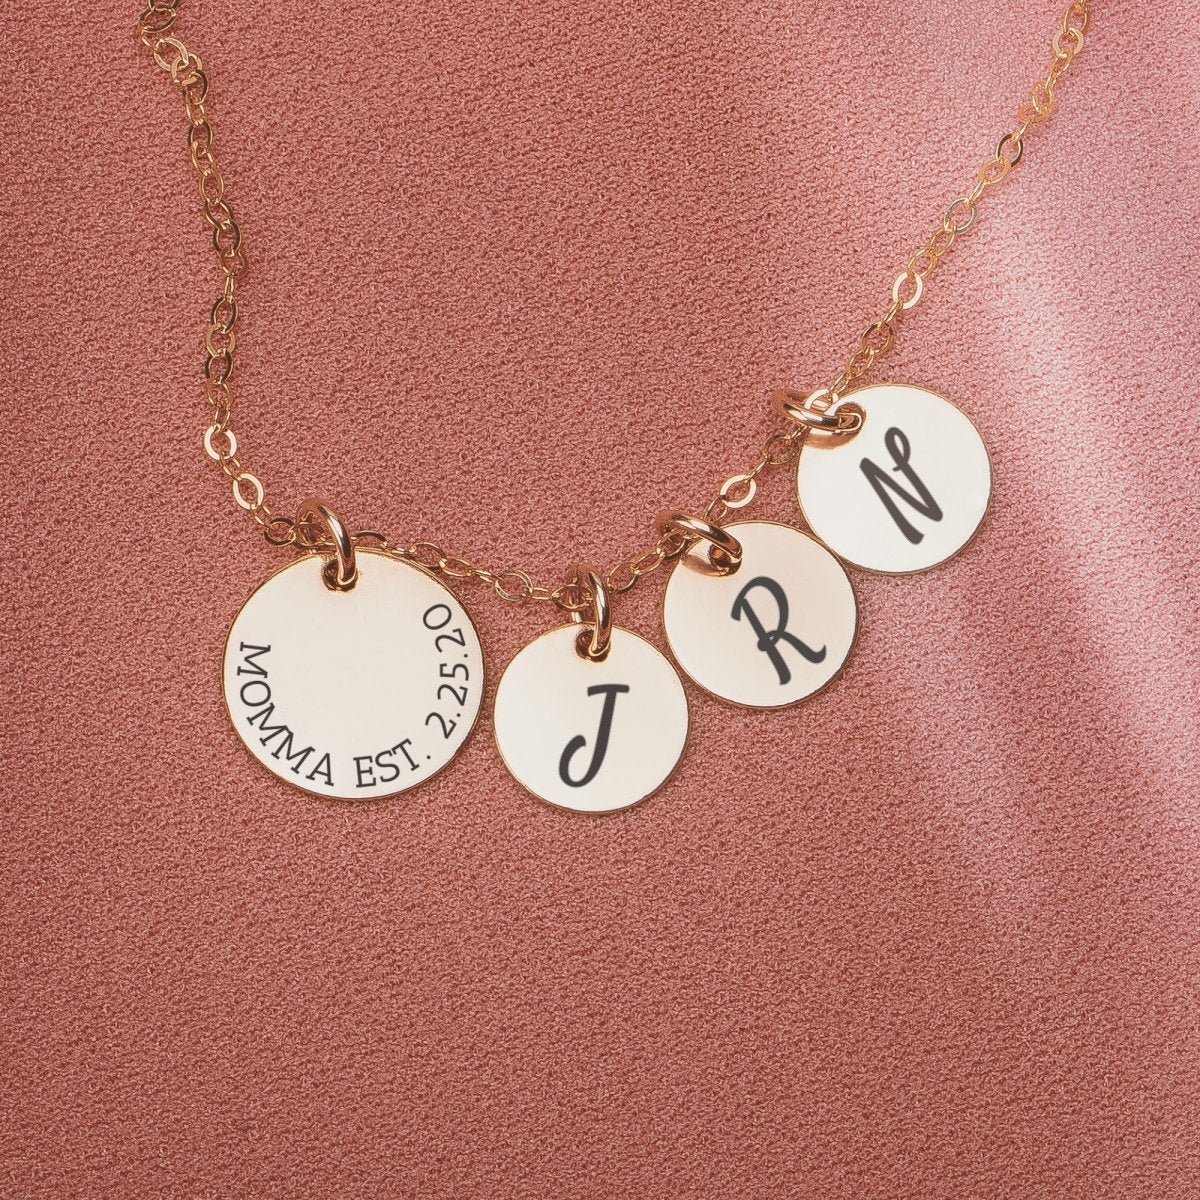 Custom Family Disc Necklace - Melanie Golden Jewelry - custom, disc necklaces, Engraved Jewelry, love, motherhood, necklace, necklaces, personalized, personalized necklace, VALENTINES